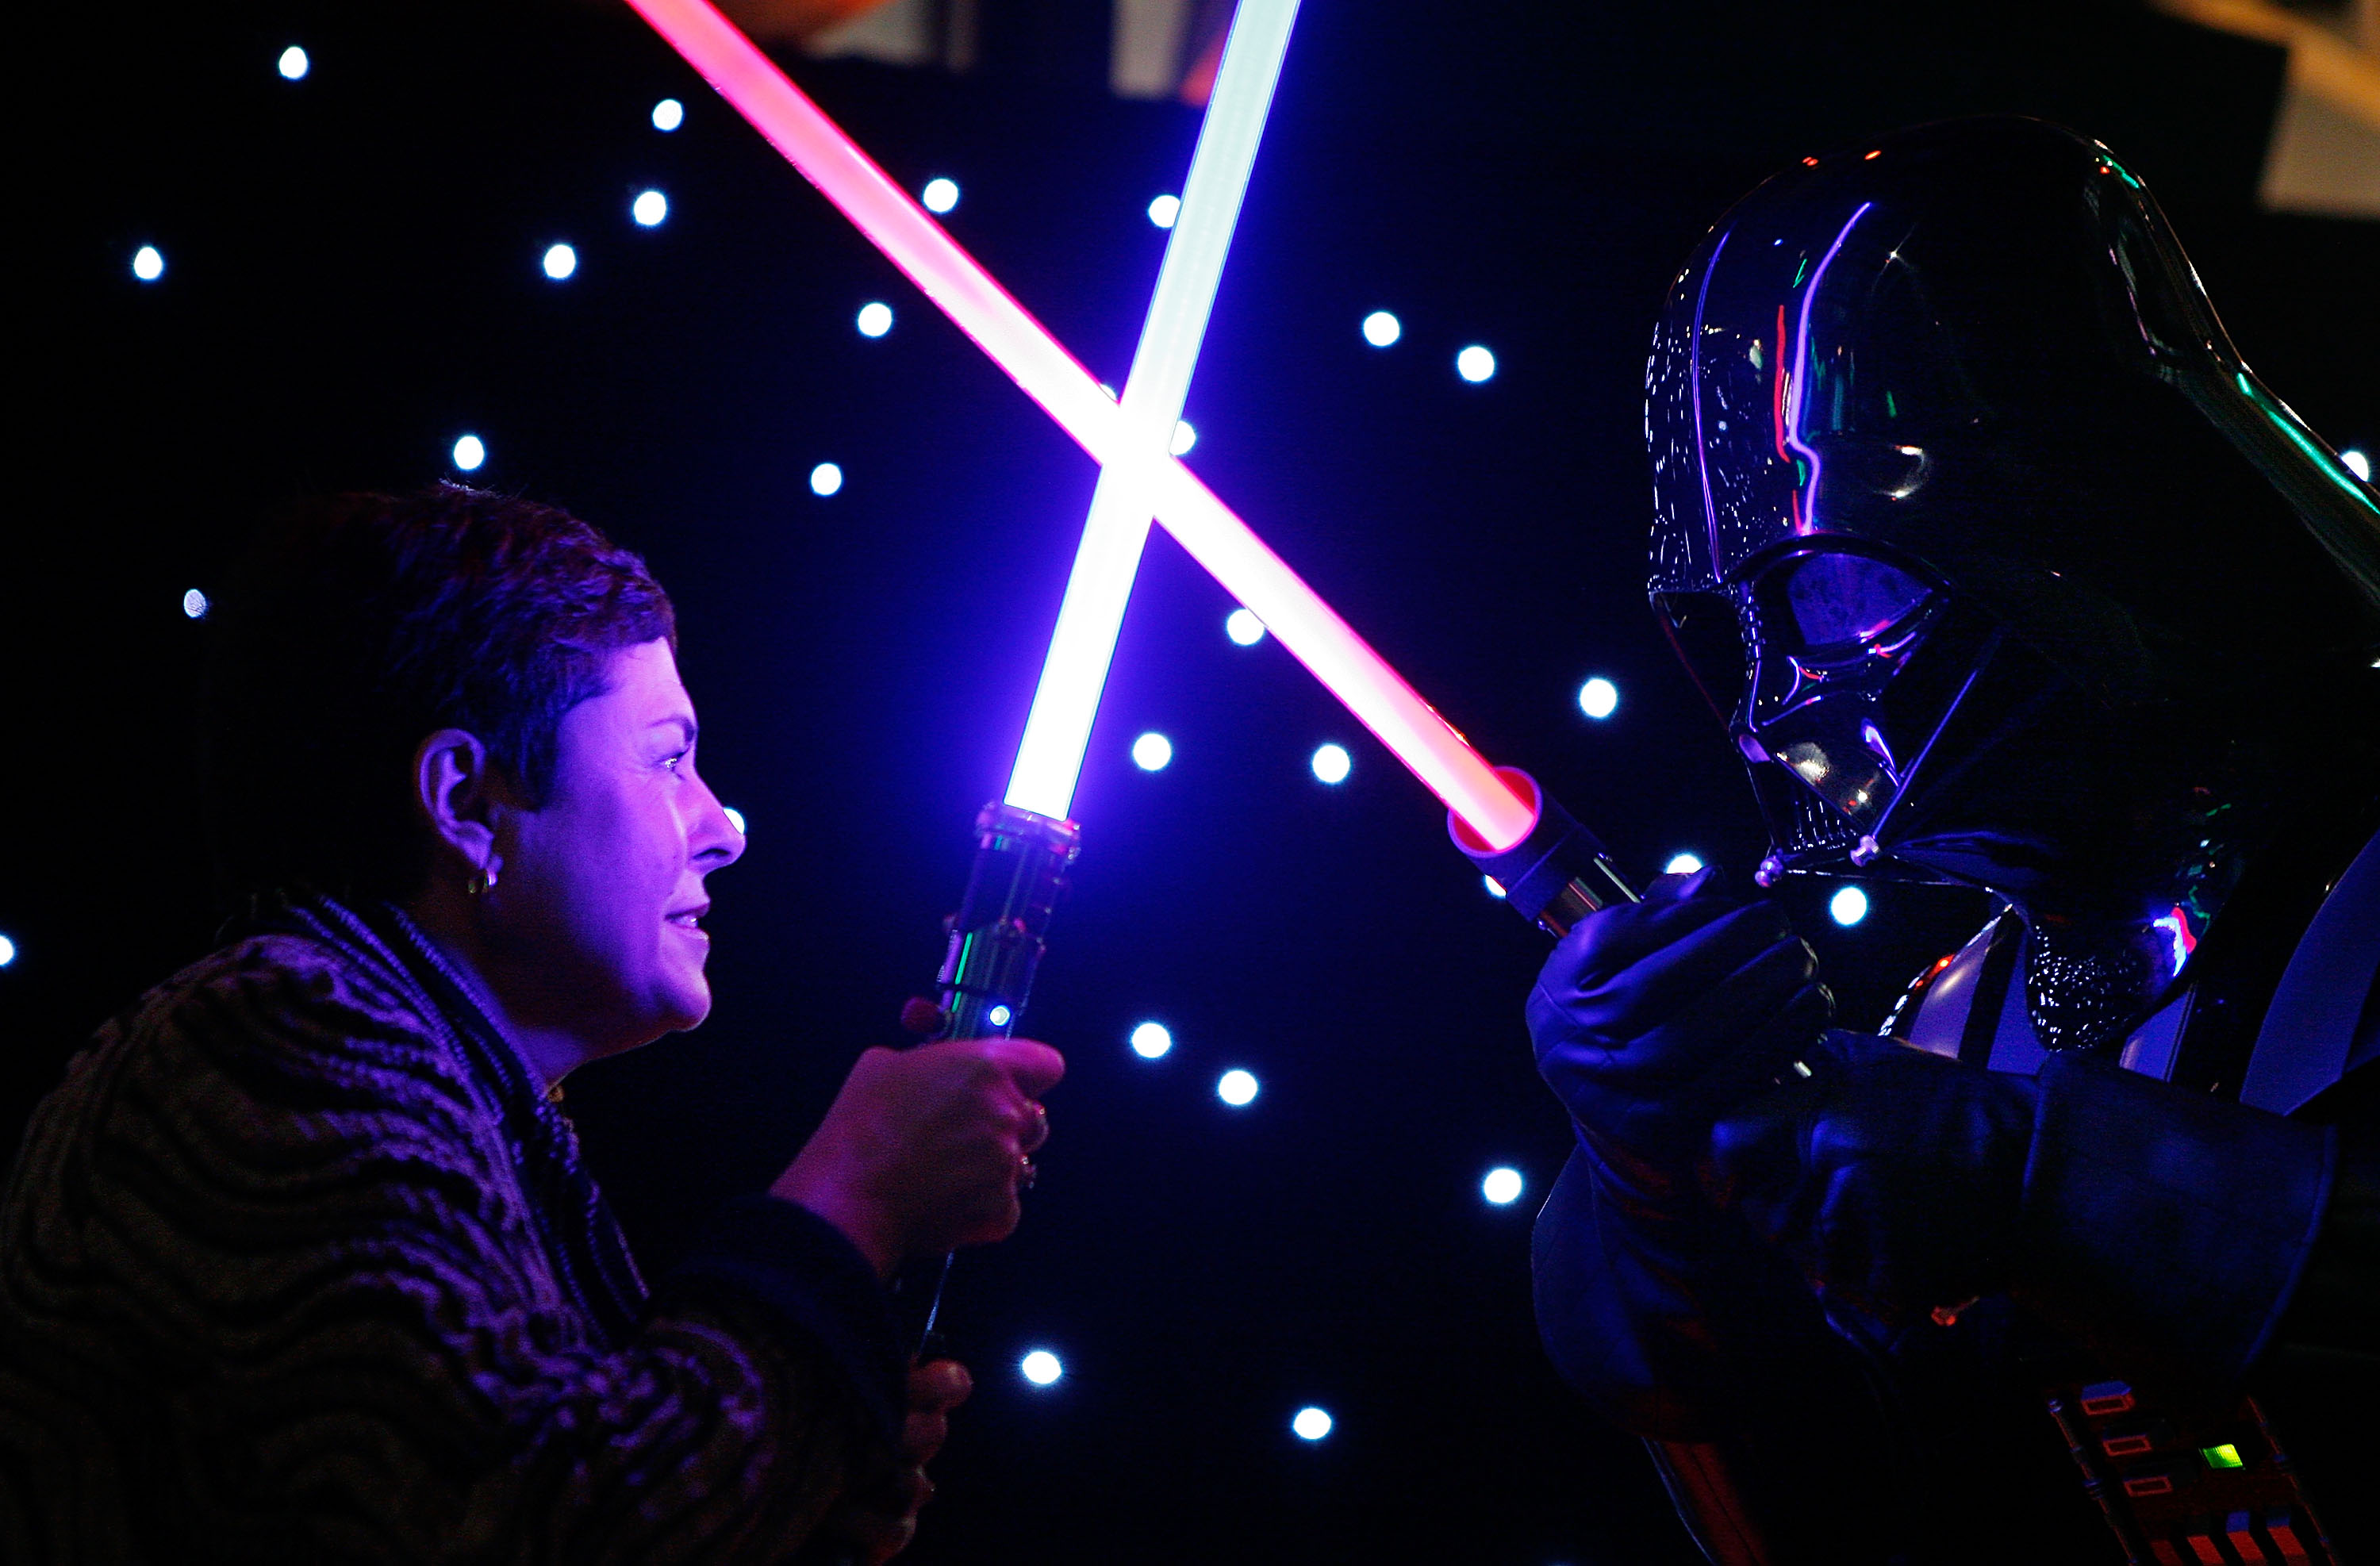 Lynne Kosky (L), Victoria's Minister for Public Transport and Minister for the Arts has a lightsaber battle with an actor dressed as Darth Vader during a preview to the 'Star Wars: Where Science Meets Imagination' exhibition at Scienceworks on June 2, 2009 in Melbourne, Australia. (Scott Barbour&mdash;Getty Images)